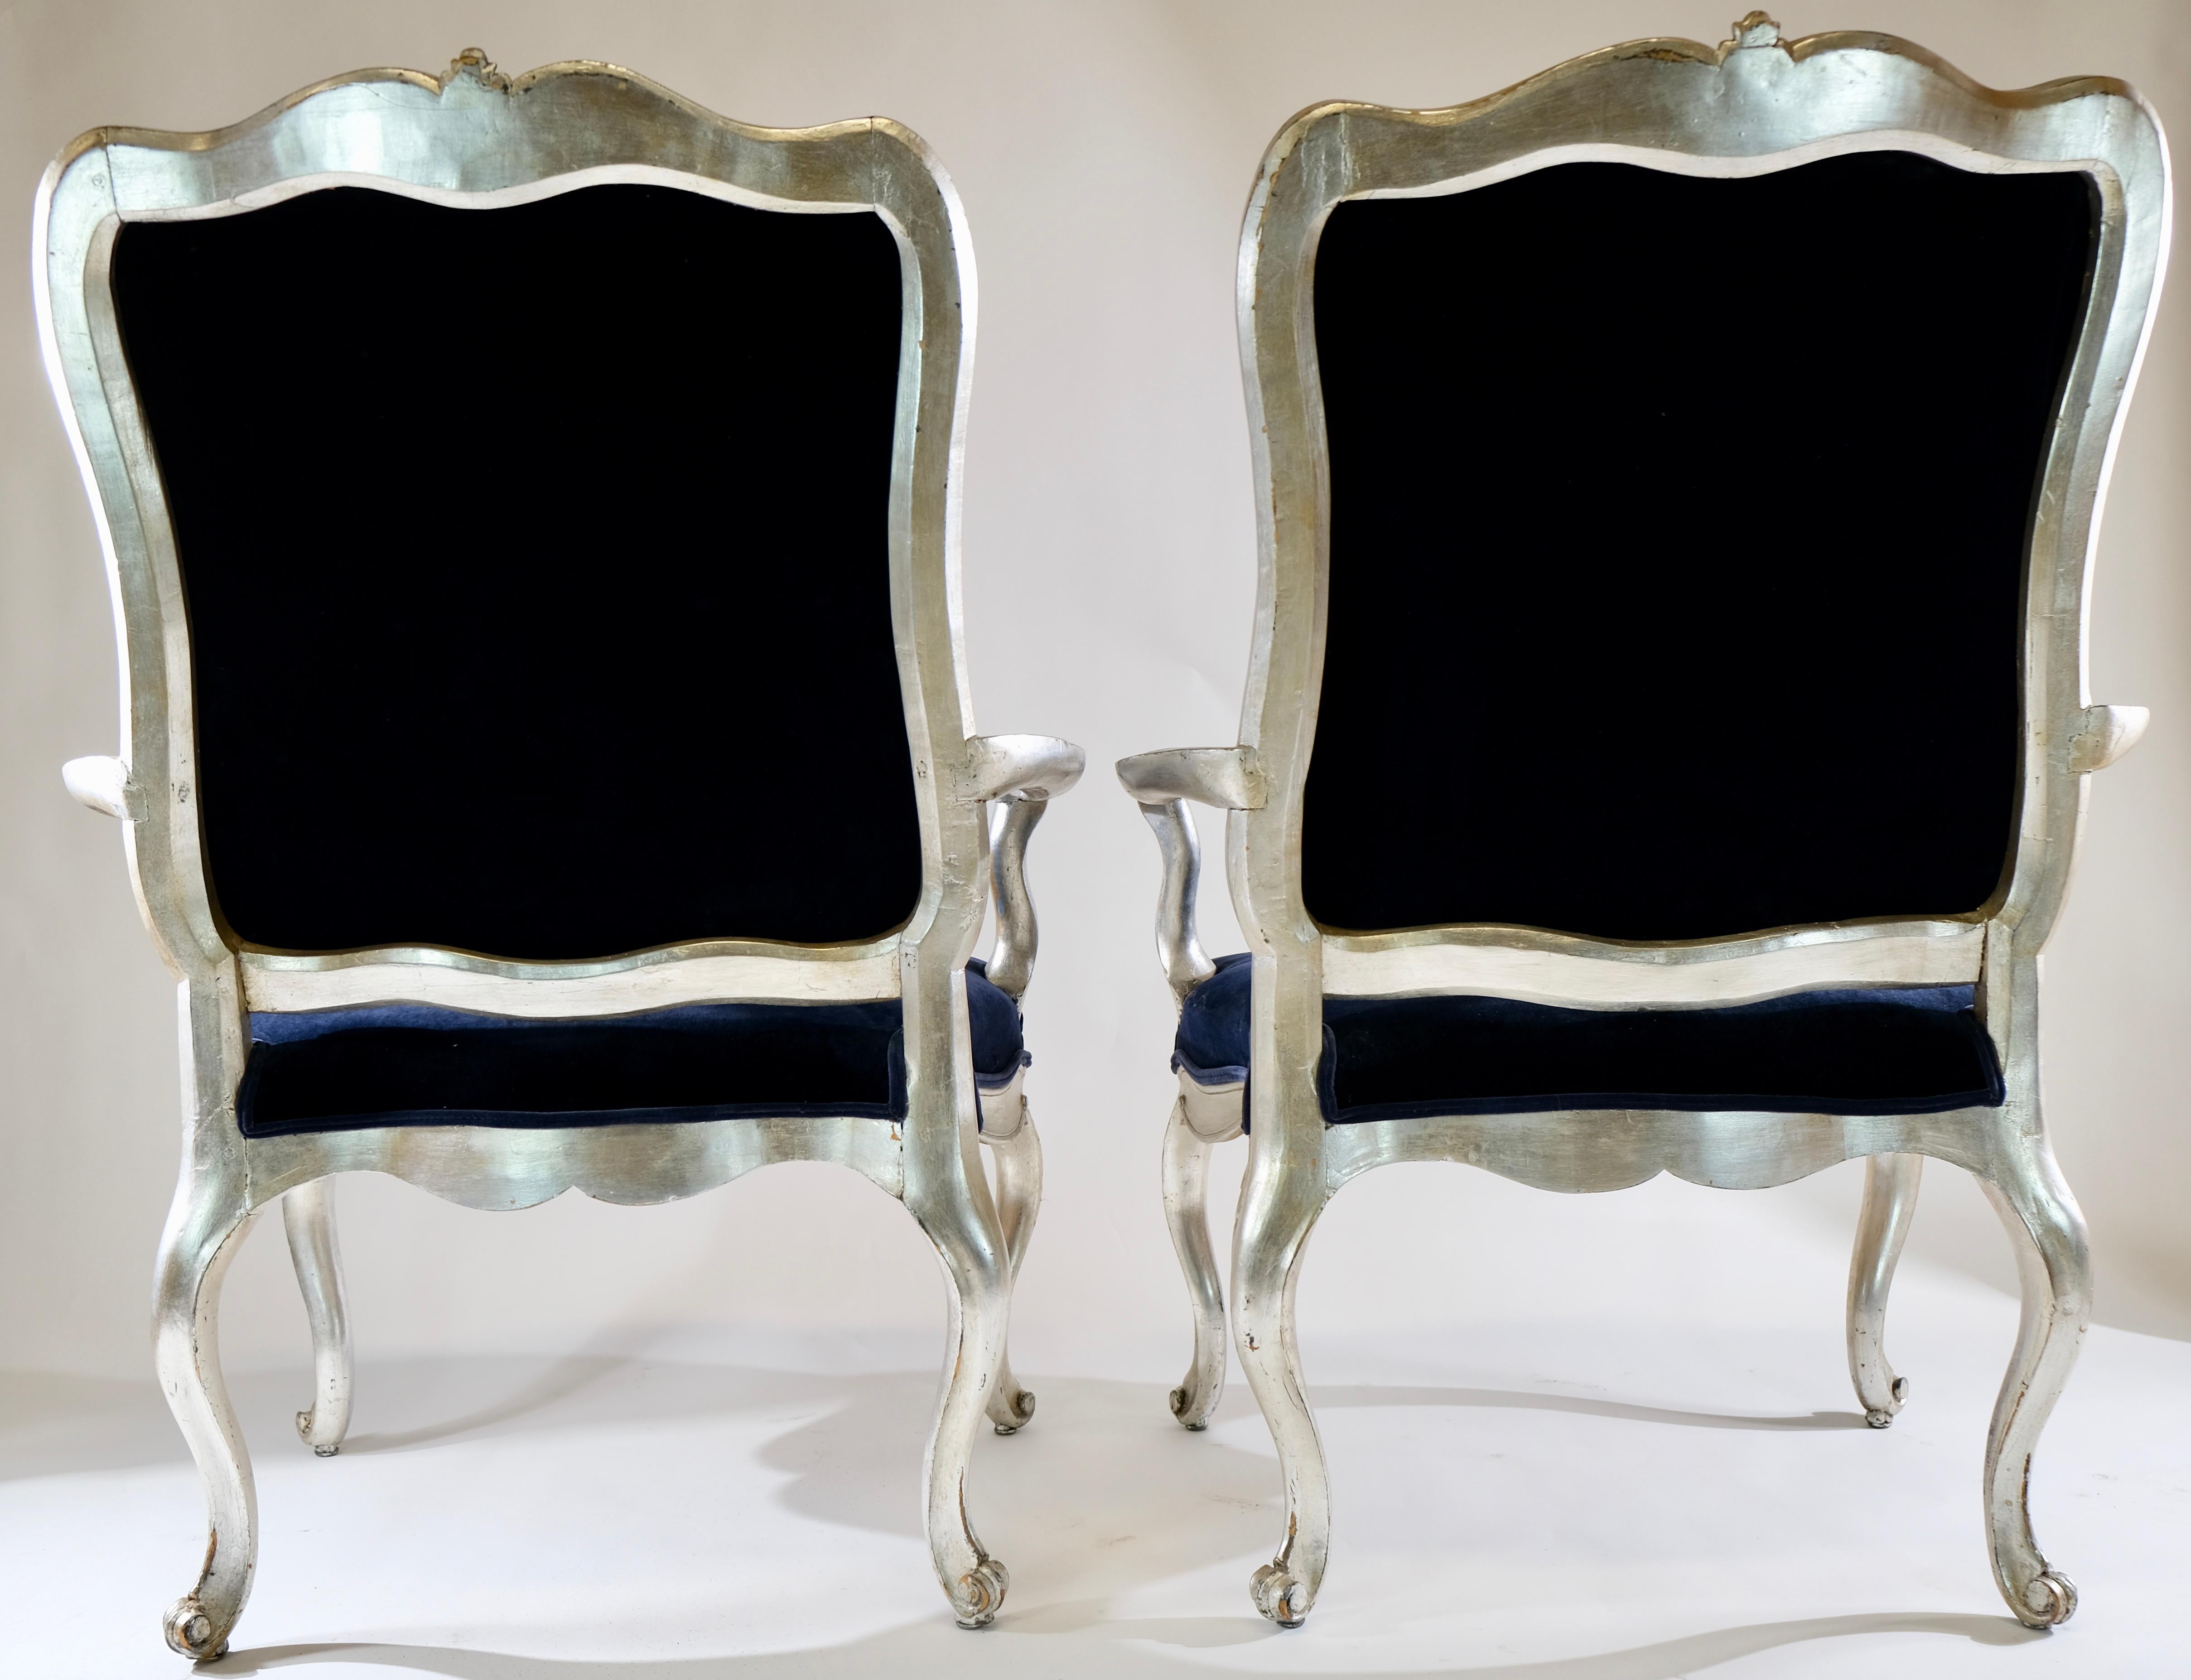 Silvered Pair of large North European 18th Century Rococo Armchairs, Mid 18th c. For Sale